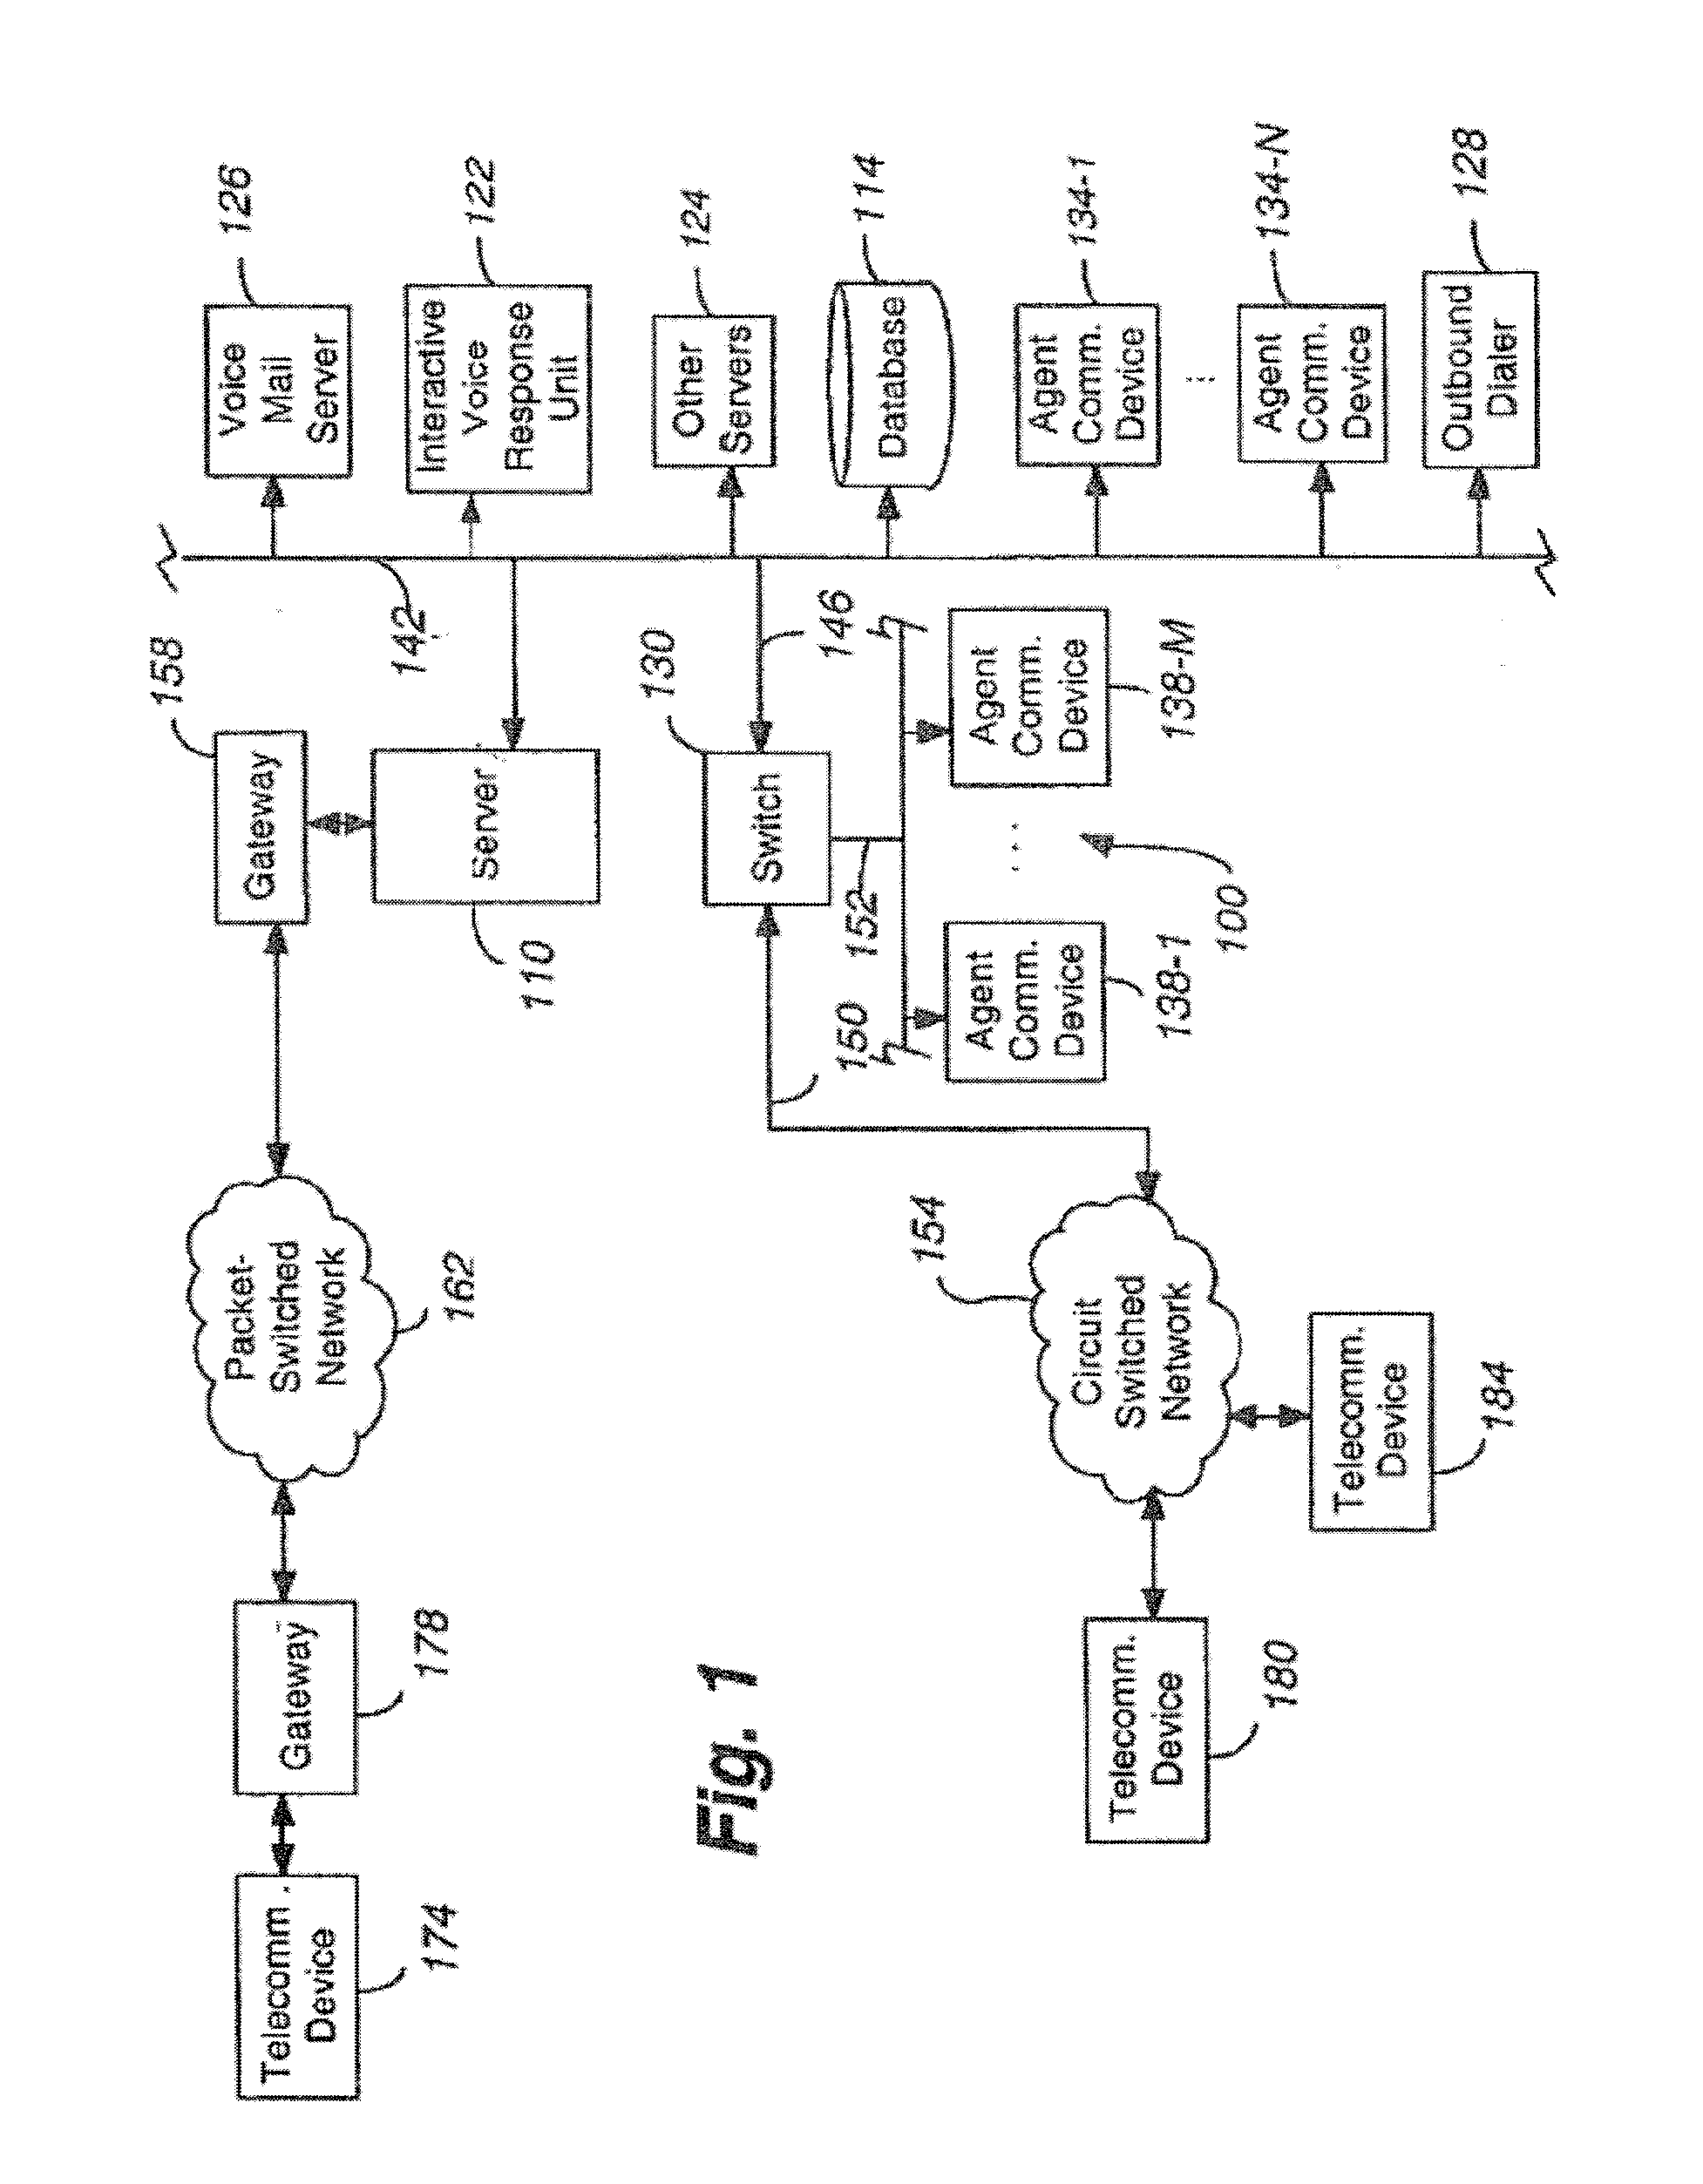 System and method for search-based work assignments in a contact center